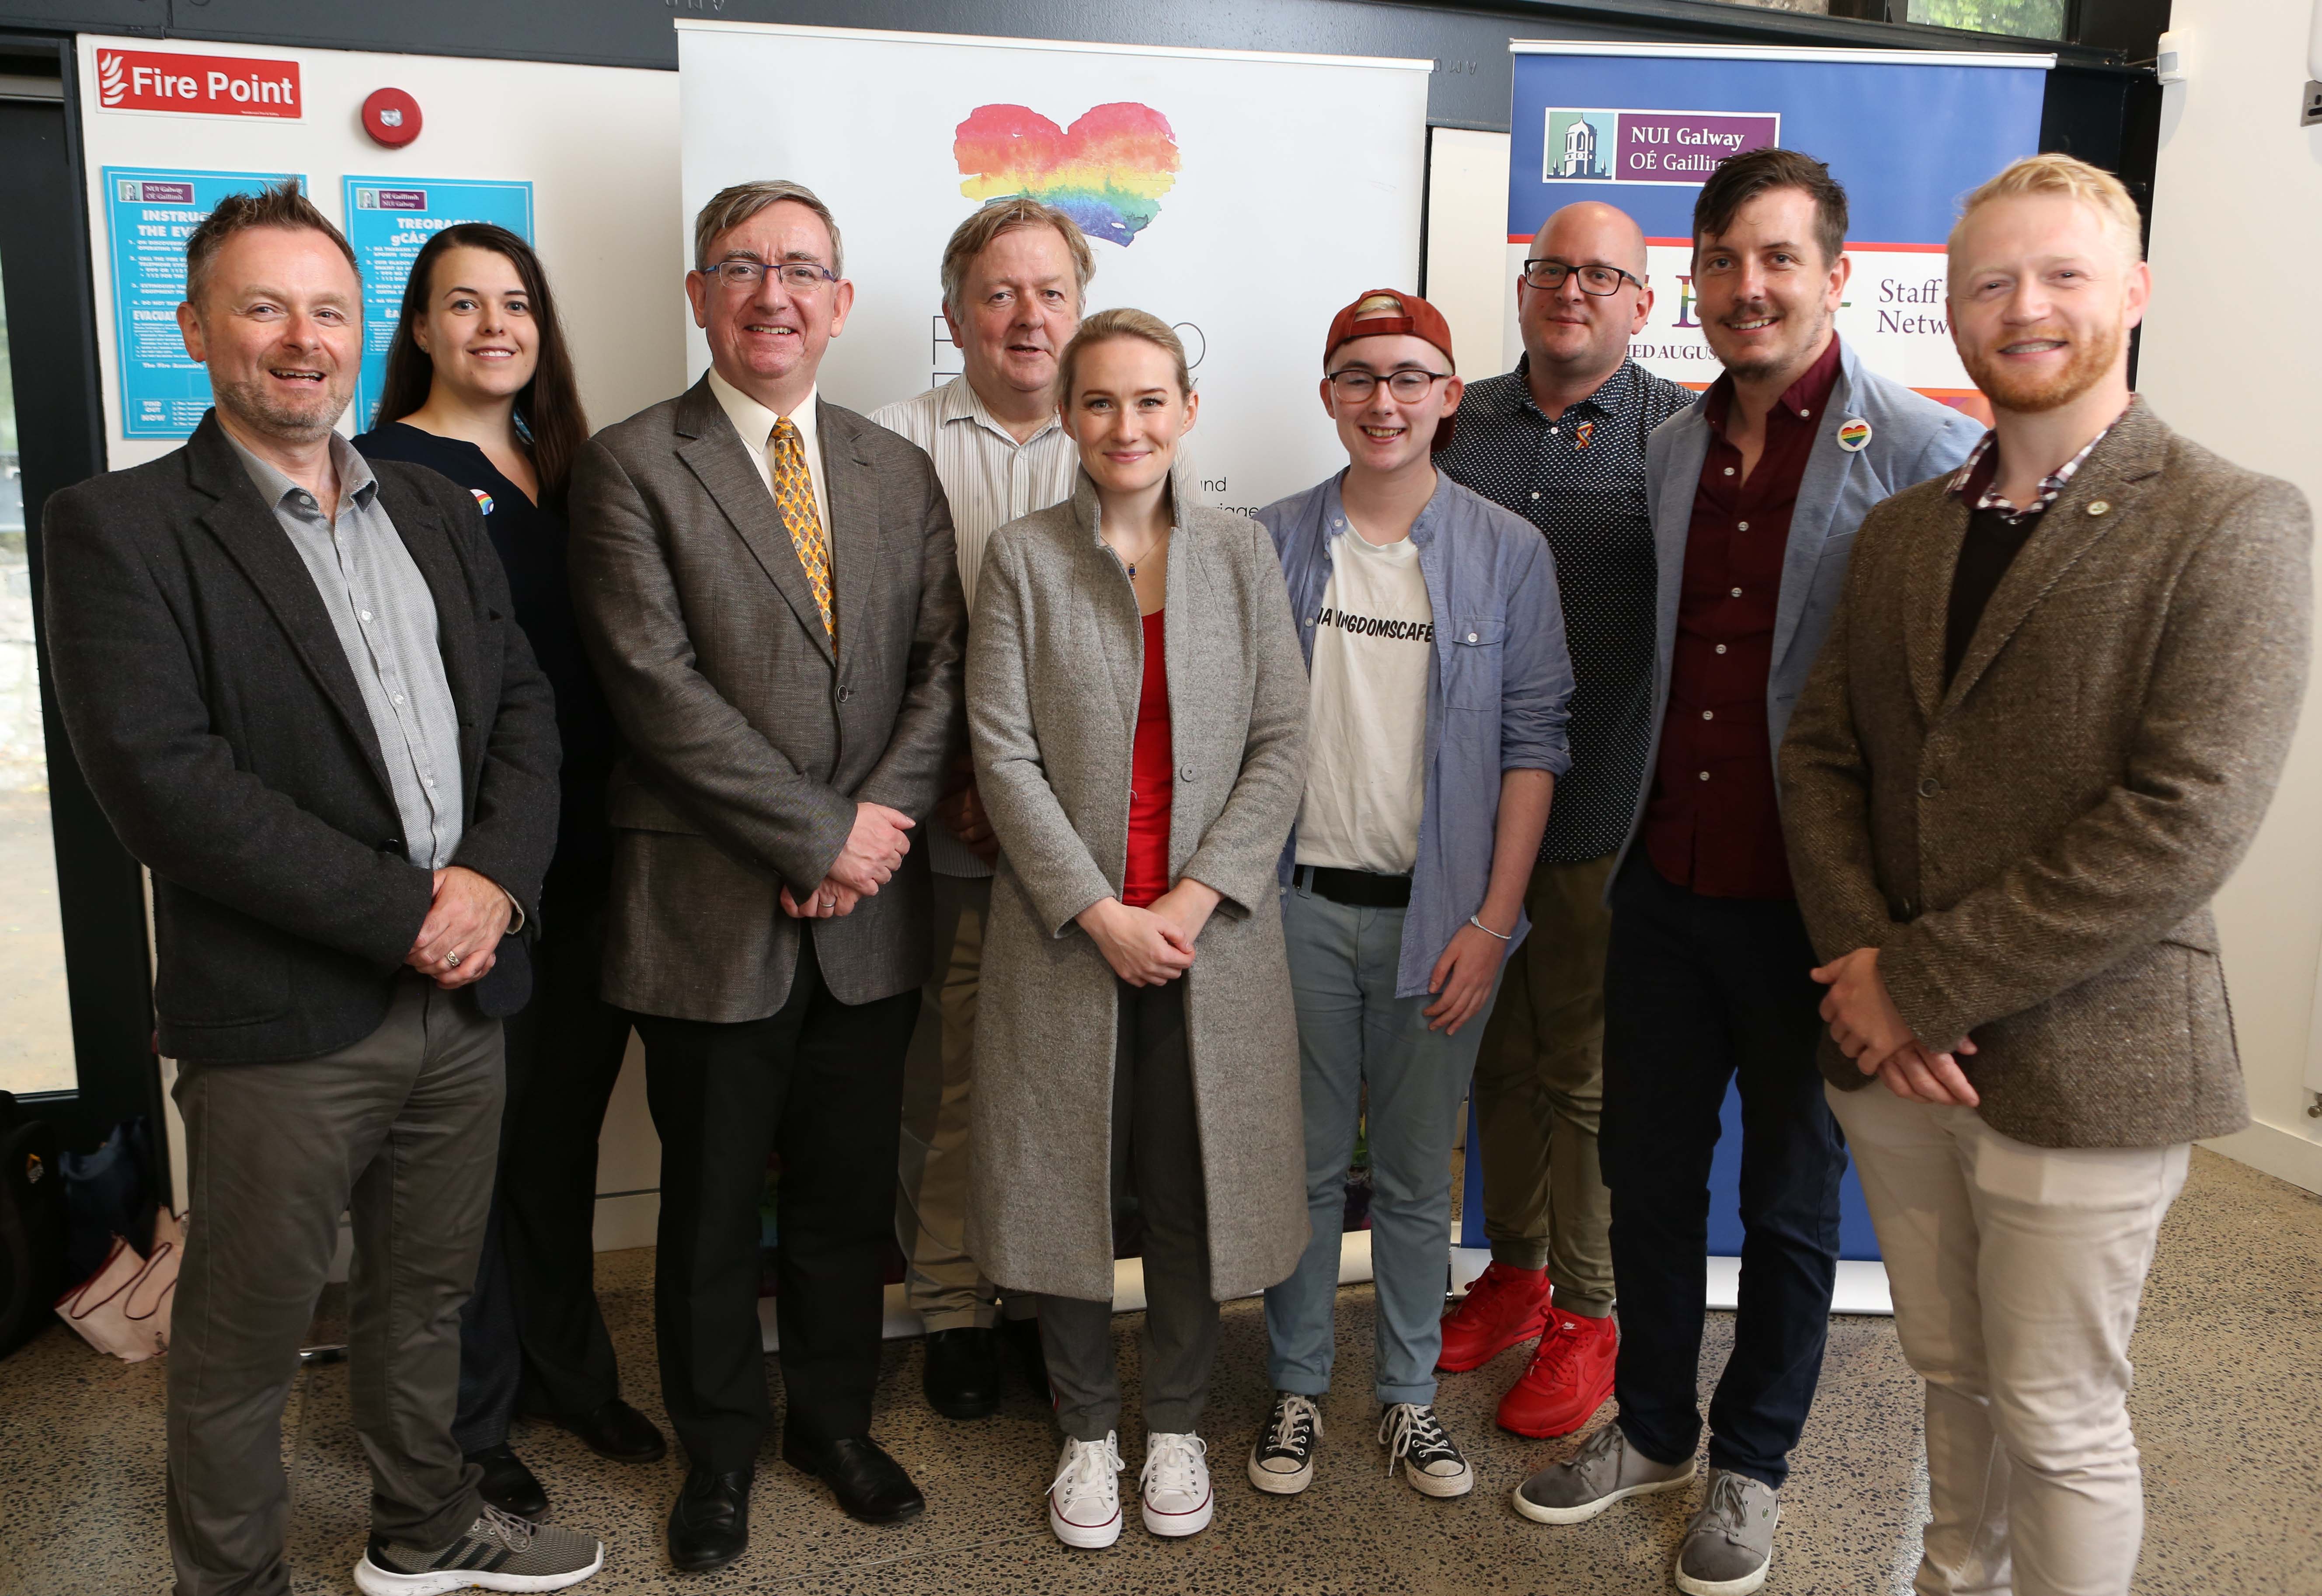 LGBT+ Staff network Executive with President at launch of Road to Equality exhibition